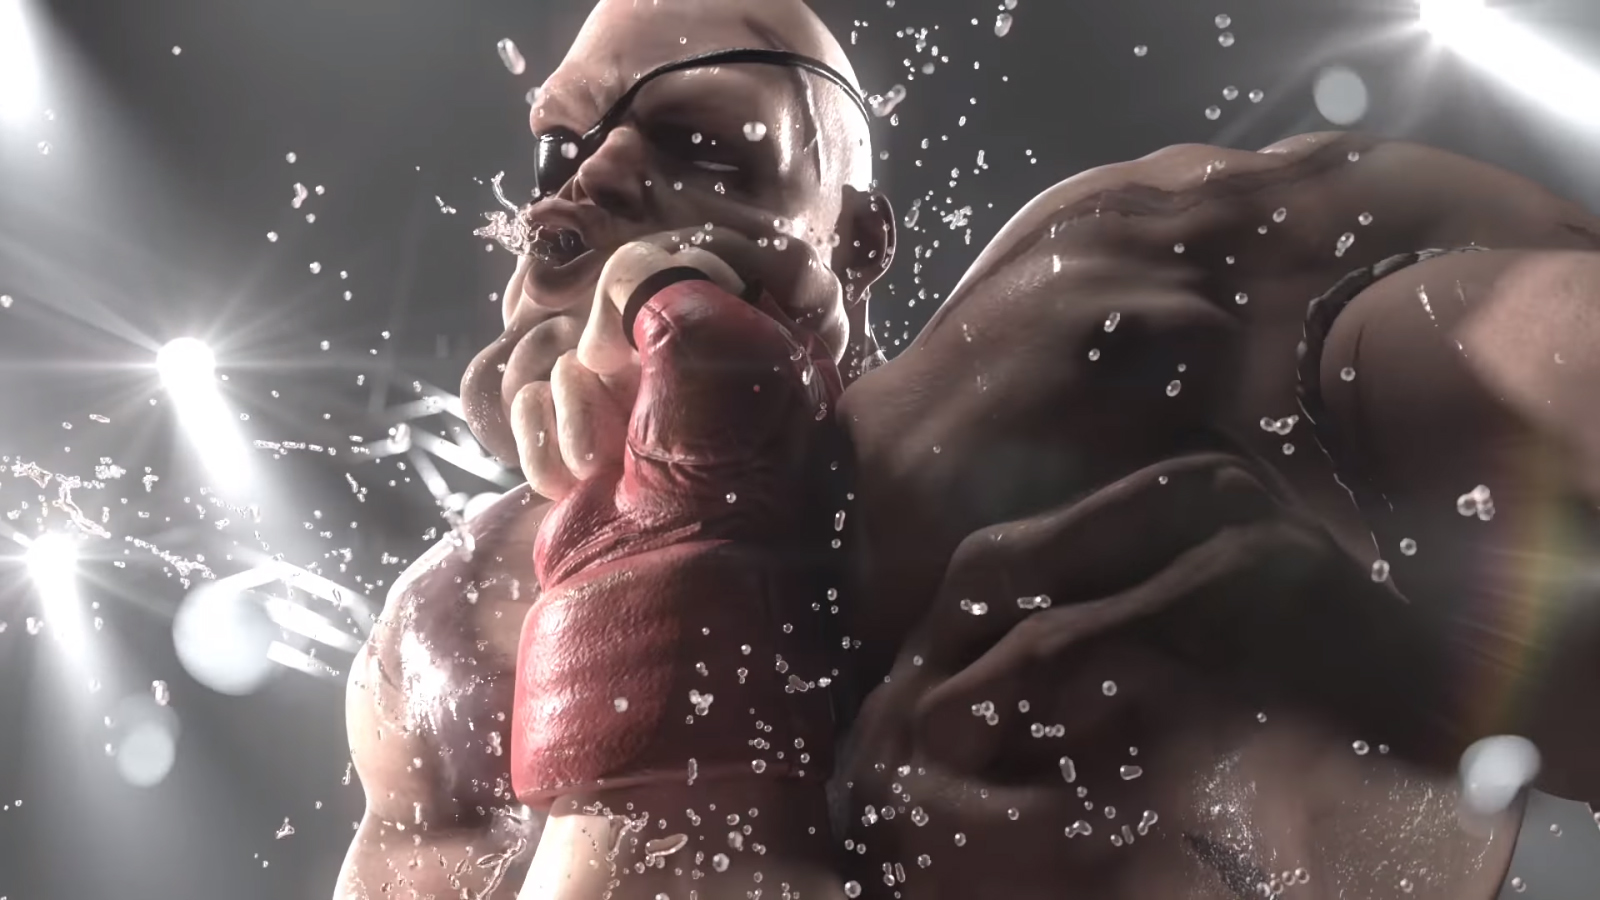 Street Fighter V Arcade Edition Opening Video : The opening video was designed to portray the refreshing feeling of a fighting game and was a fusion of animation and Look Development art styles.  